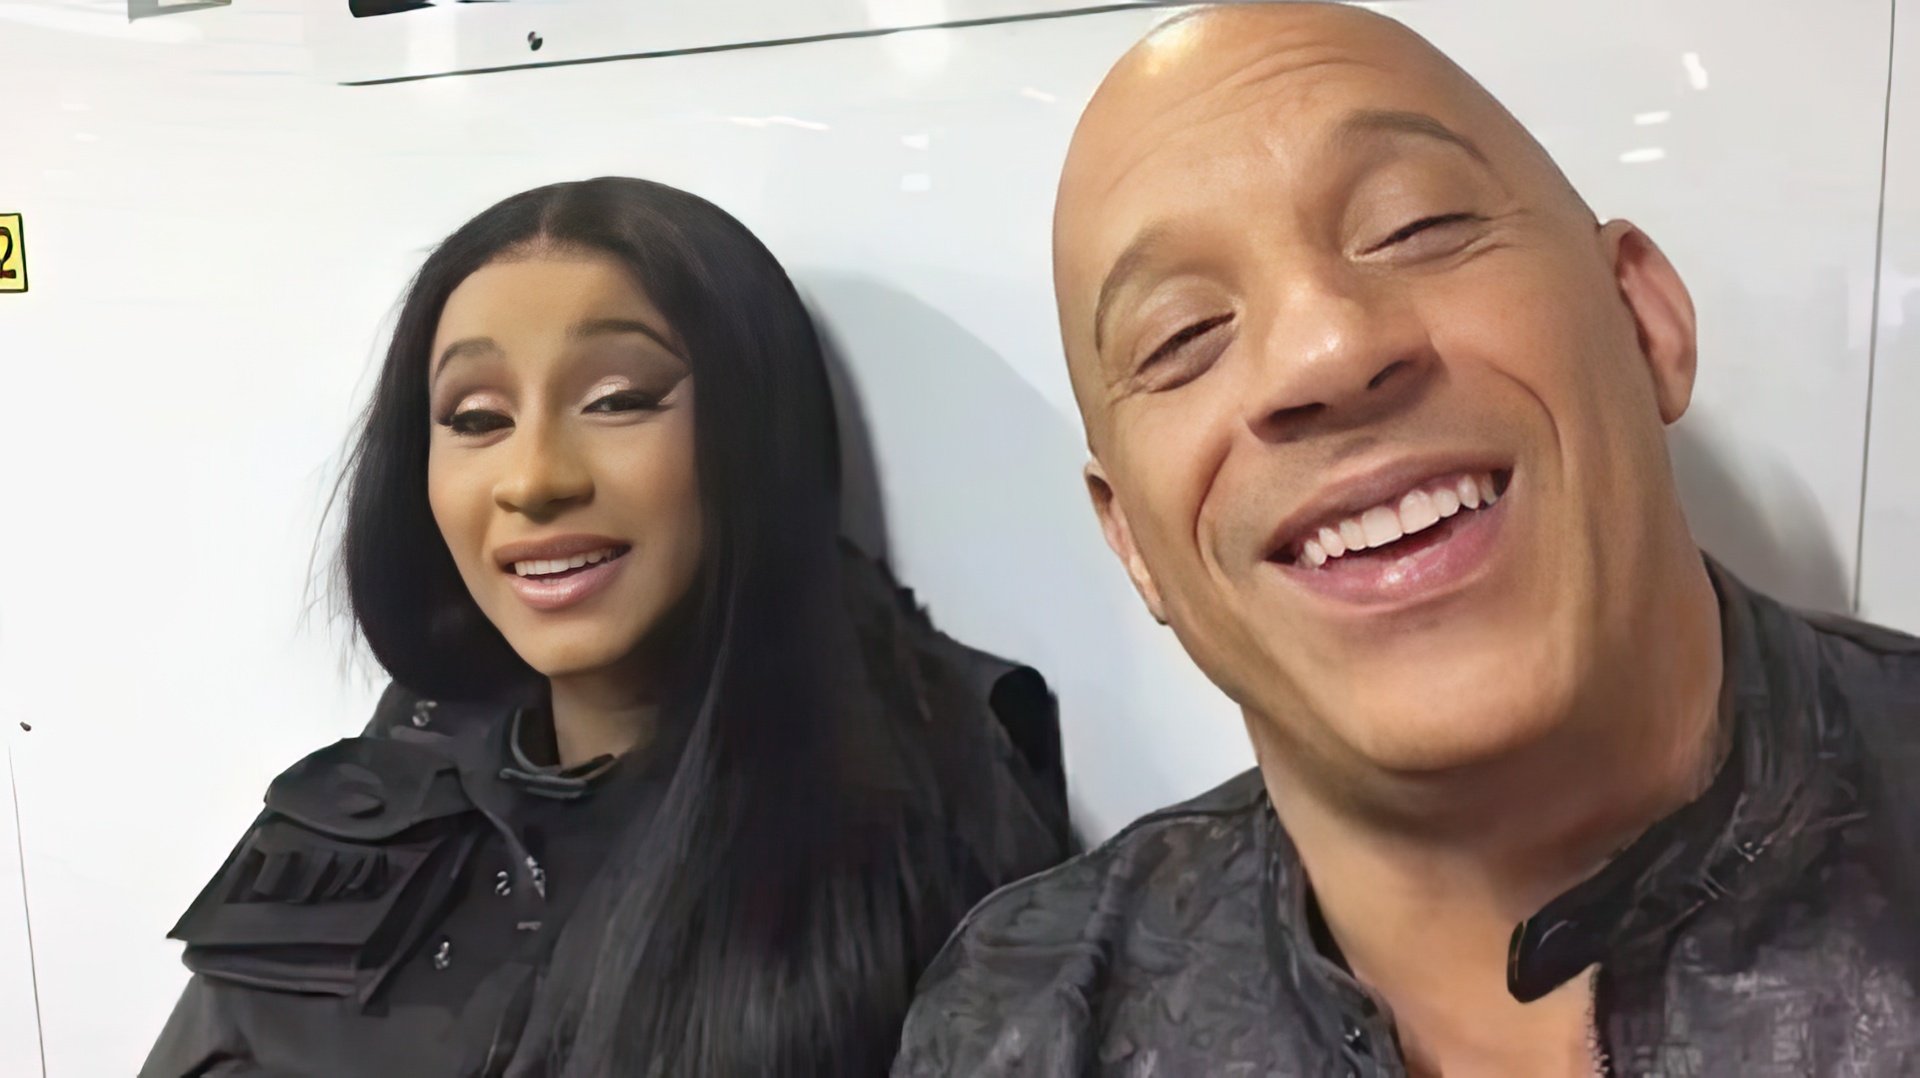 Cardi B and Vin Diesel on the set of 'Fast & Furious 9'